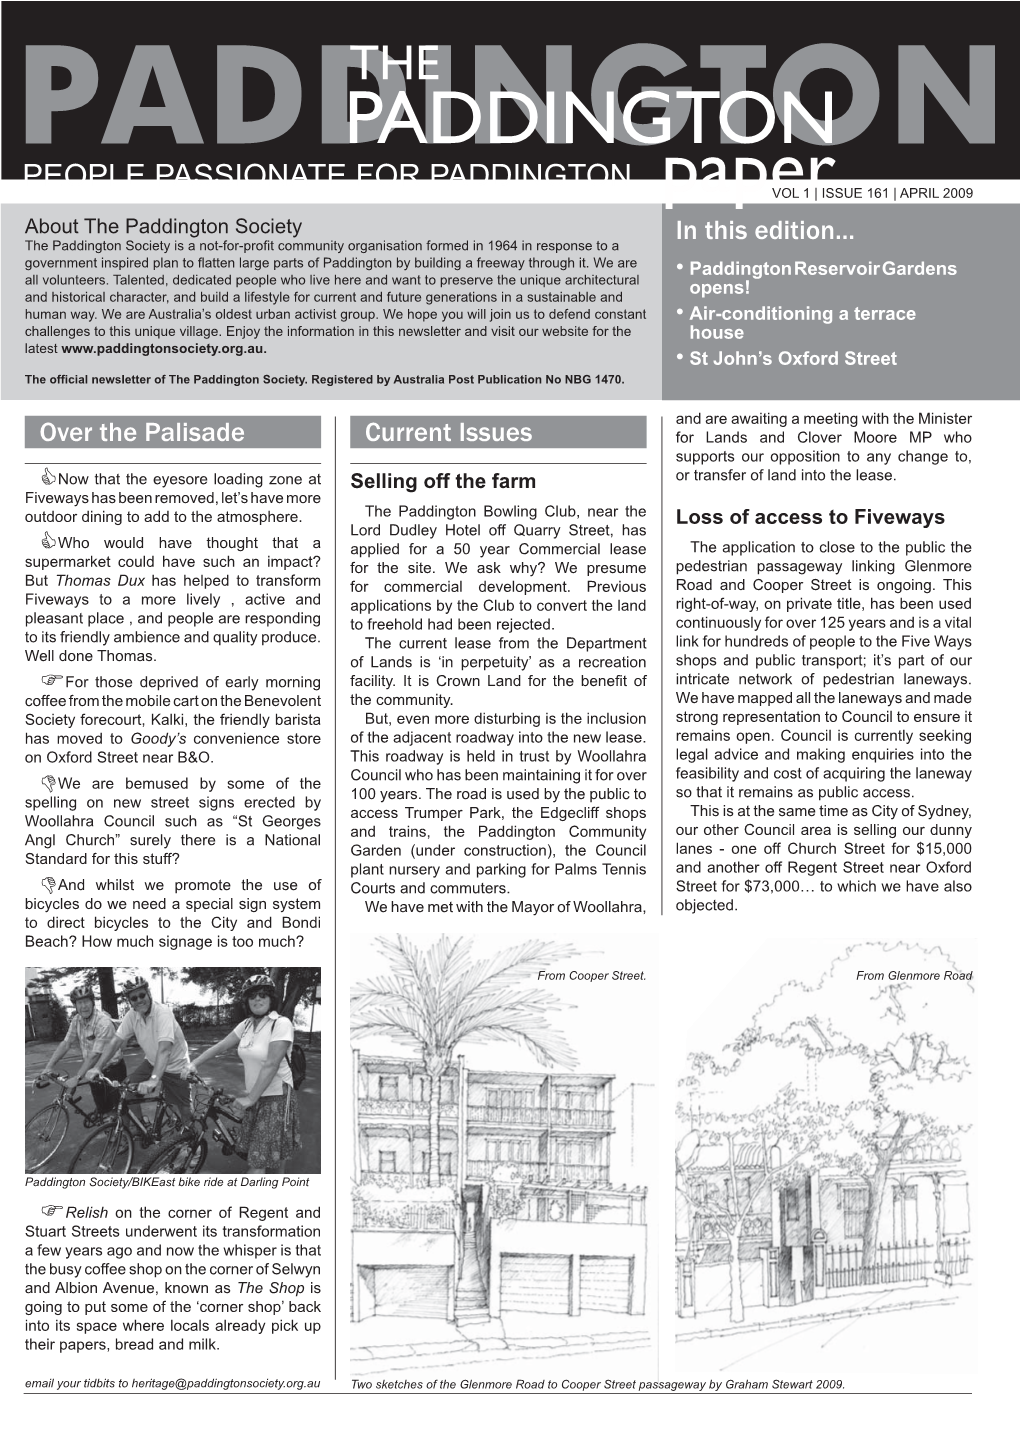 APRIL 2009 About the Paddington Society in This Edition